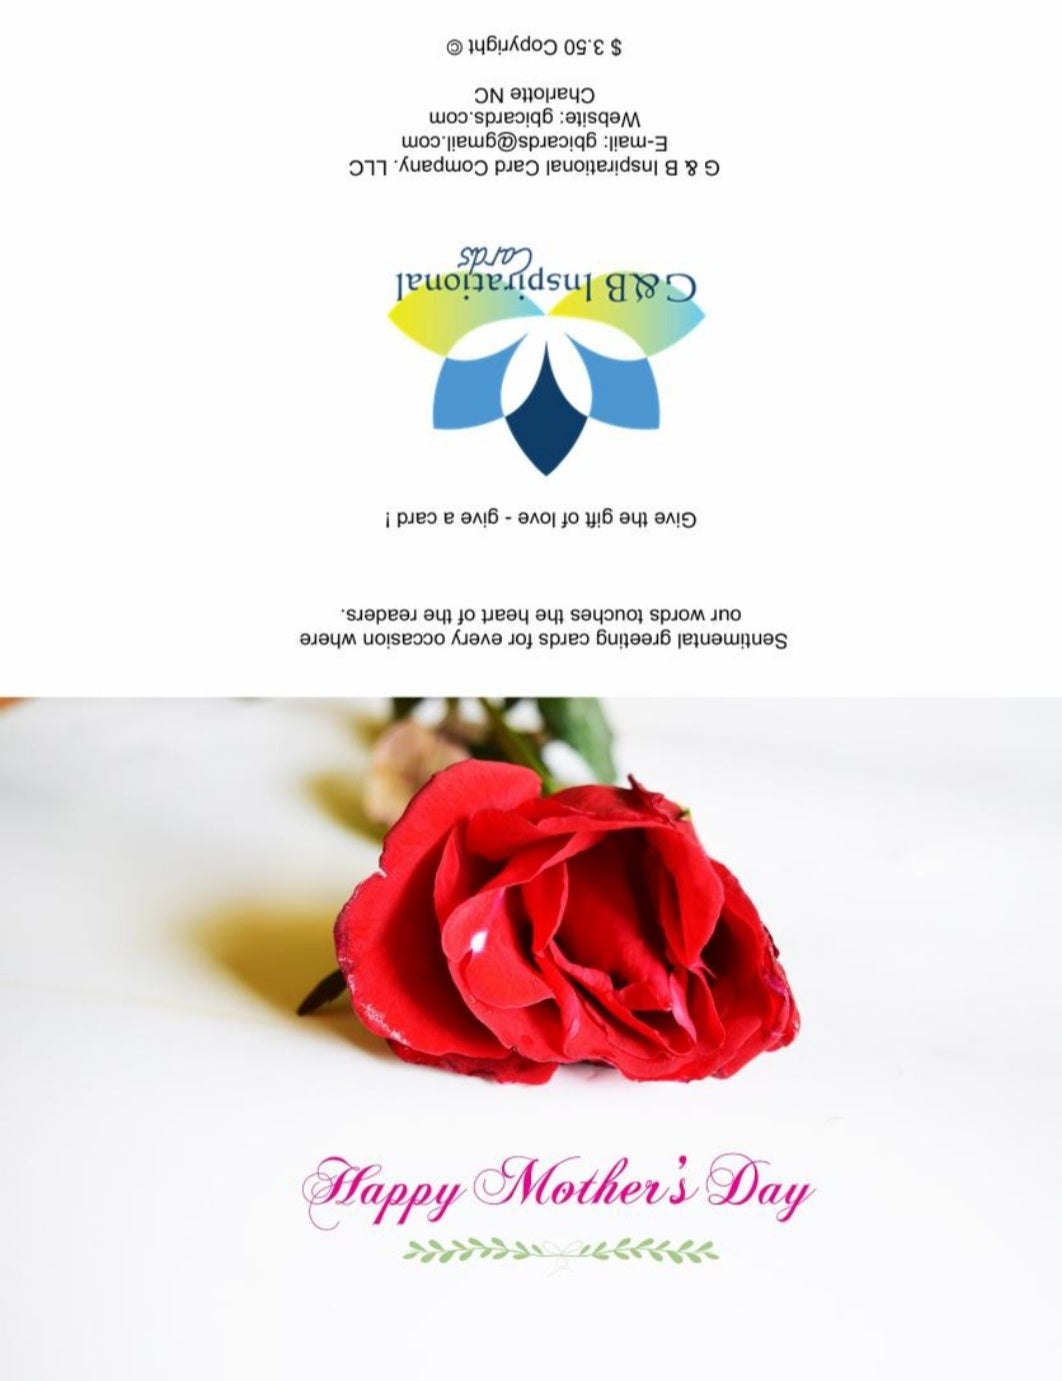 Happy Mother's Day #7